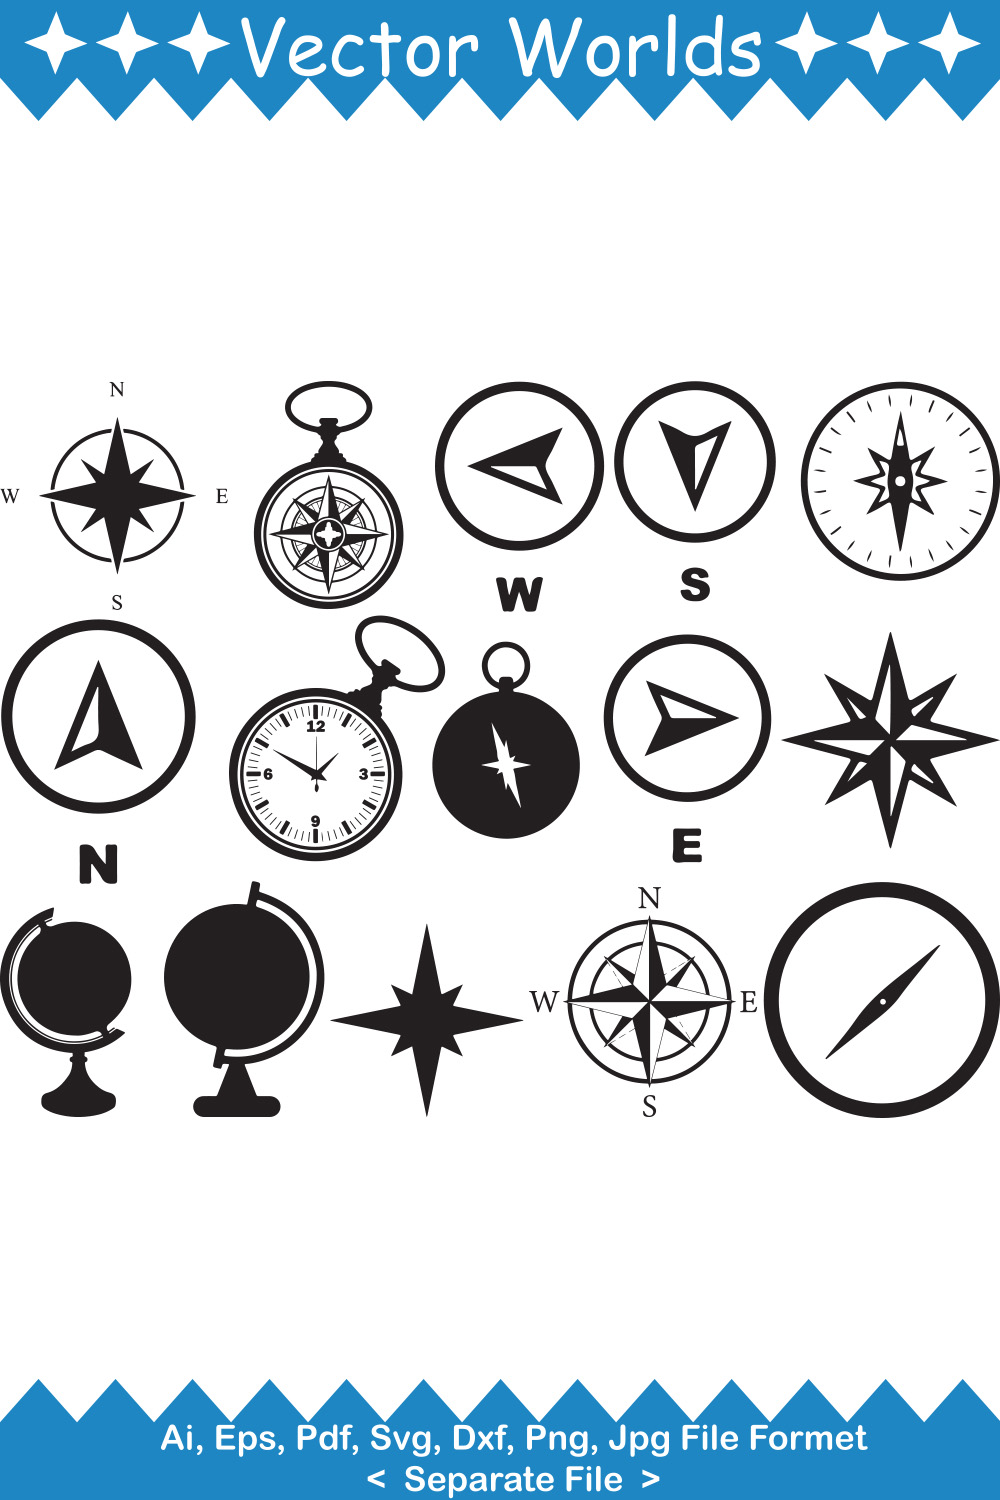 Set of marvelous vector images of compass silhouettes